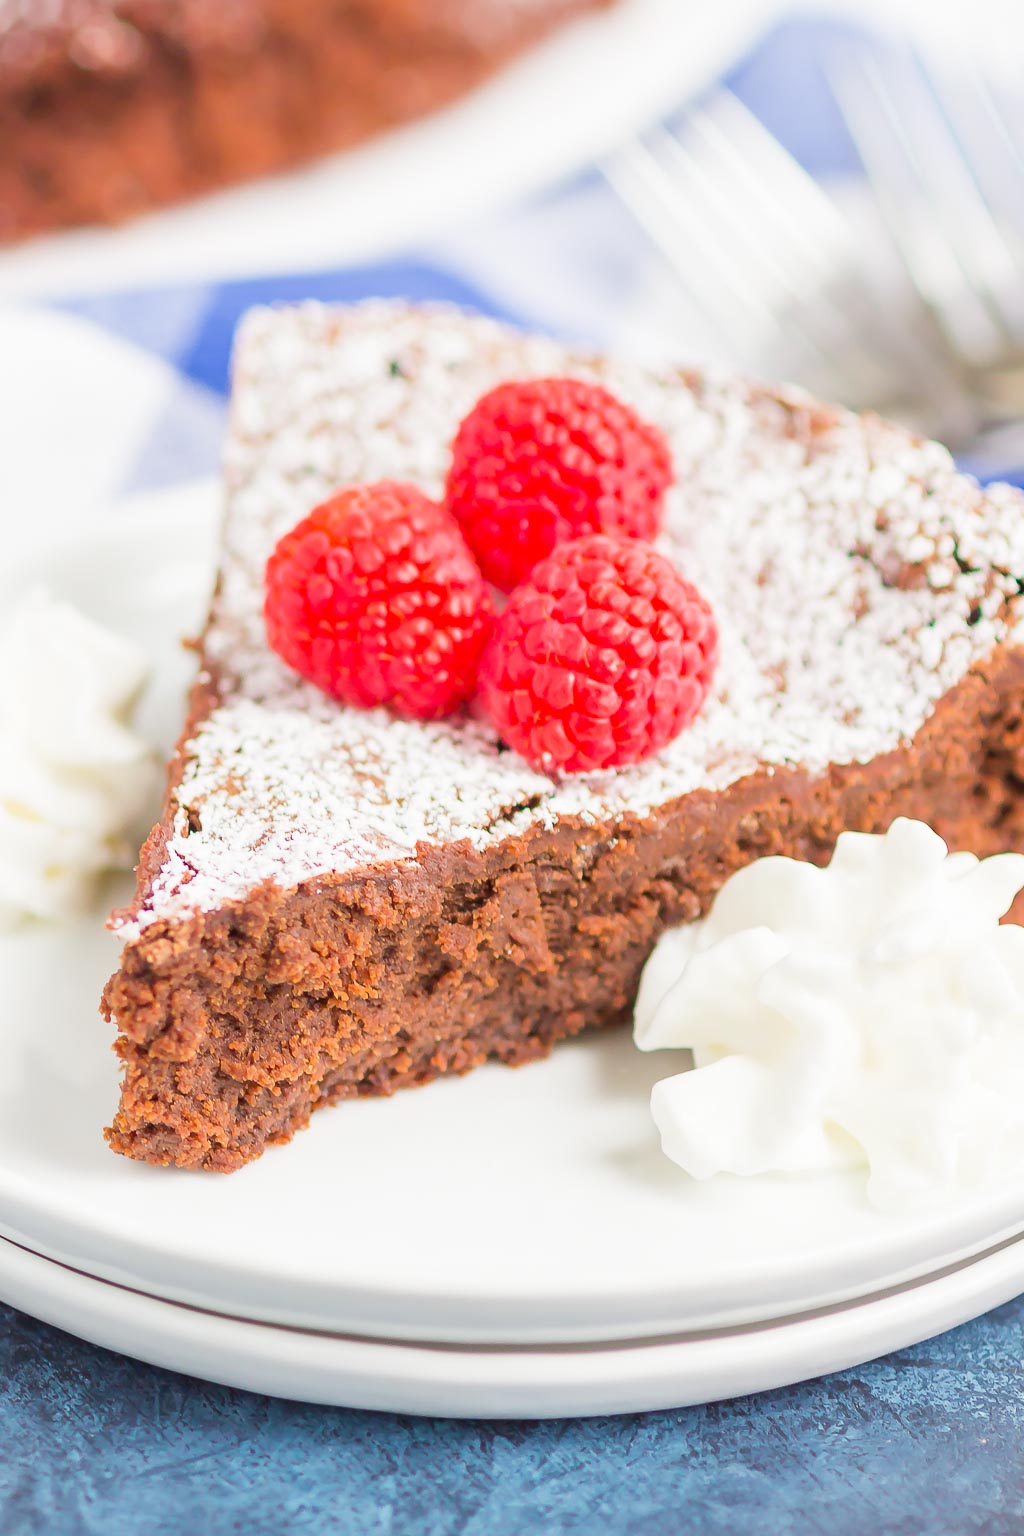 Flourless Chocolate Cake is an easy dessert that's rich, fudgy and decadent. Made with just five ingredients, this smooth and gluten-free cake is will become a favorite all year long! #cake #chocolatecake #flourlesscake #flourlesschocolatecake #chocolatetorte #flourlessdessert #dessert #chocolate dessert